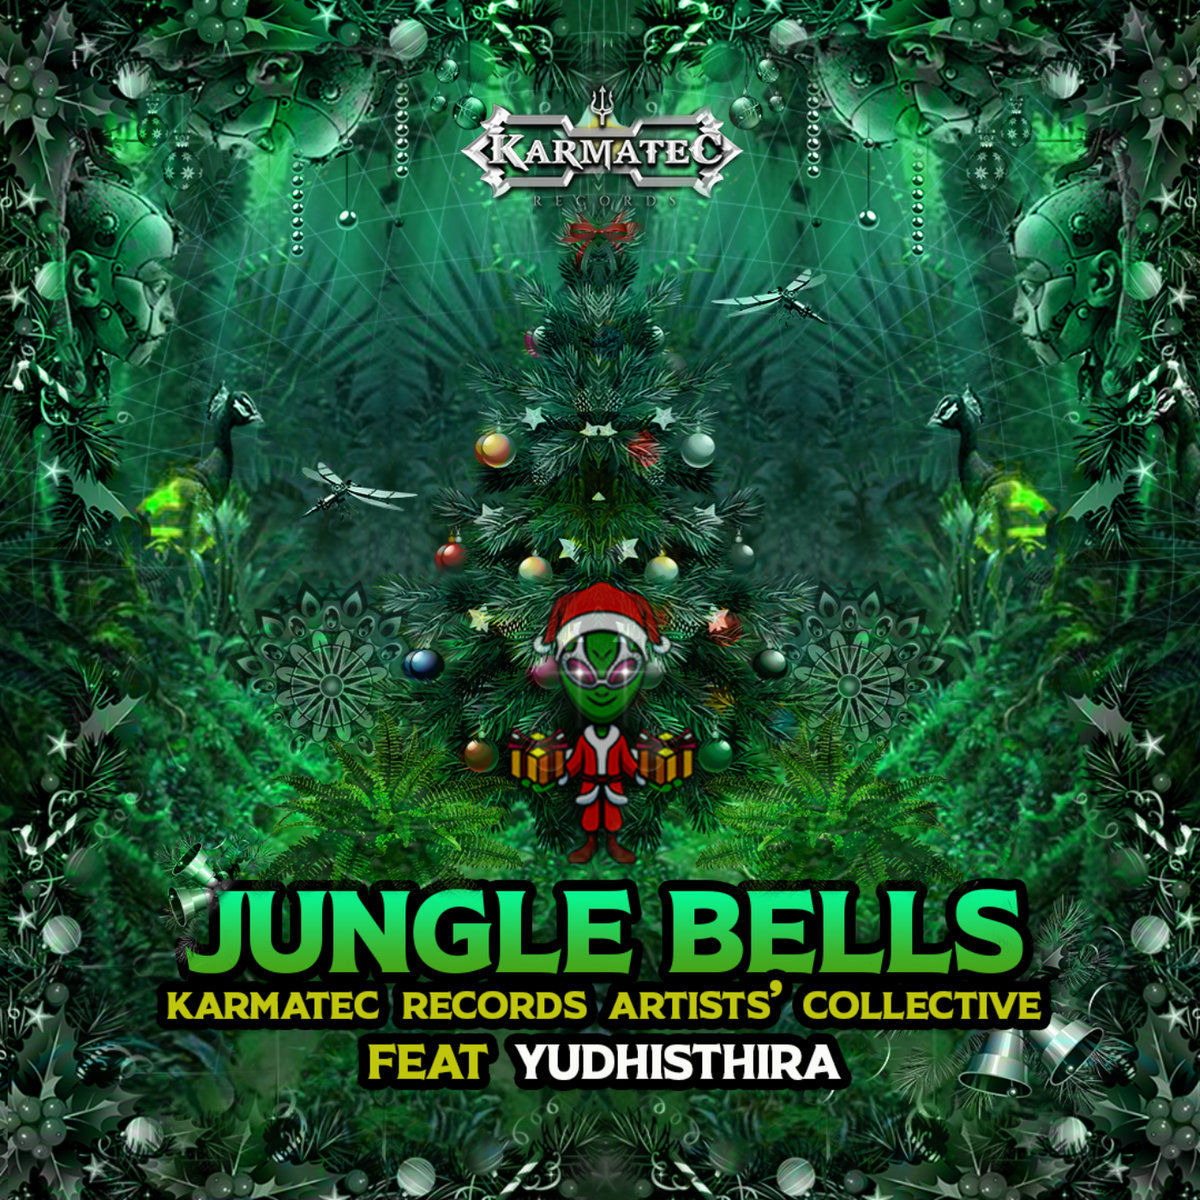 Jungle Bells, Karmatec Records artists collective feat. Yudhisthira